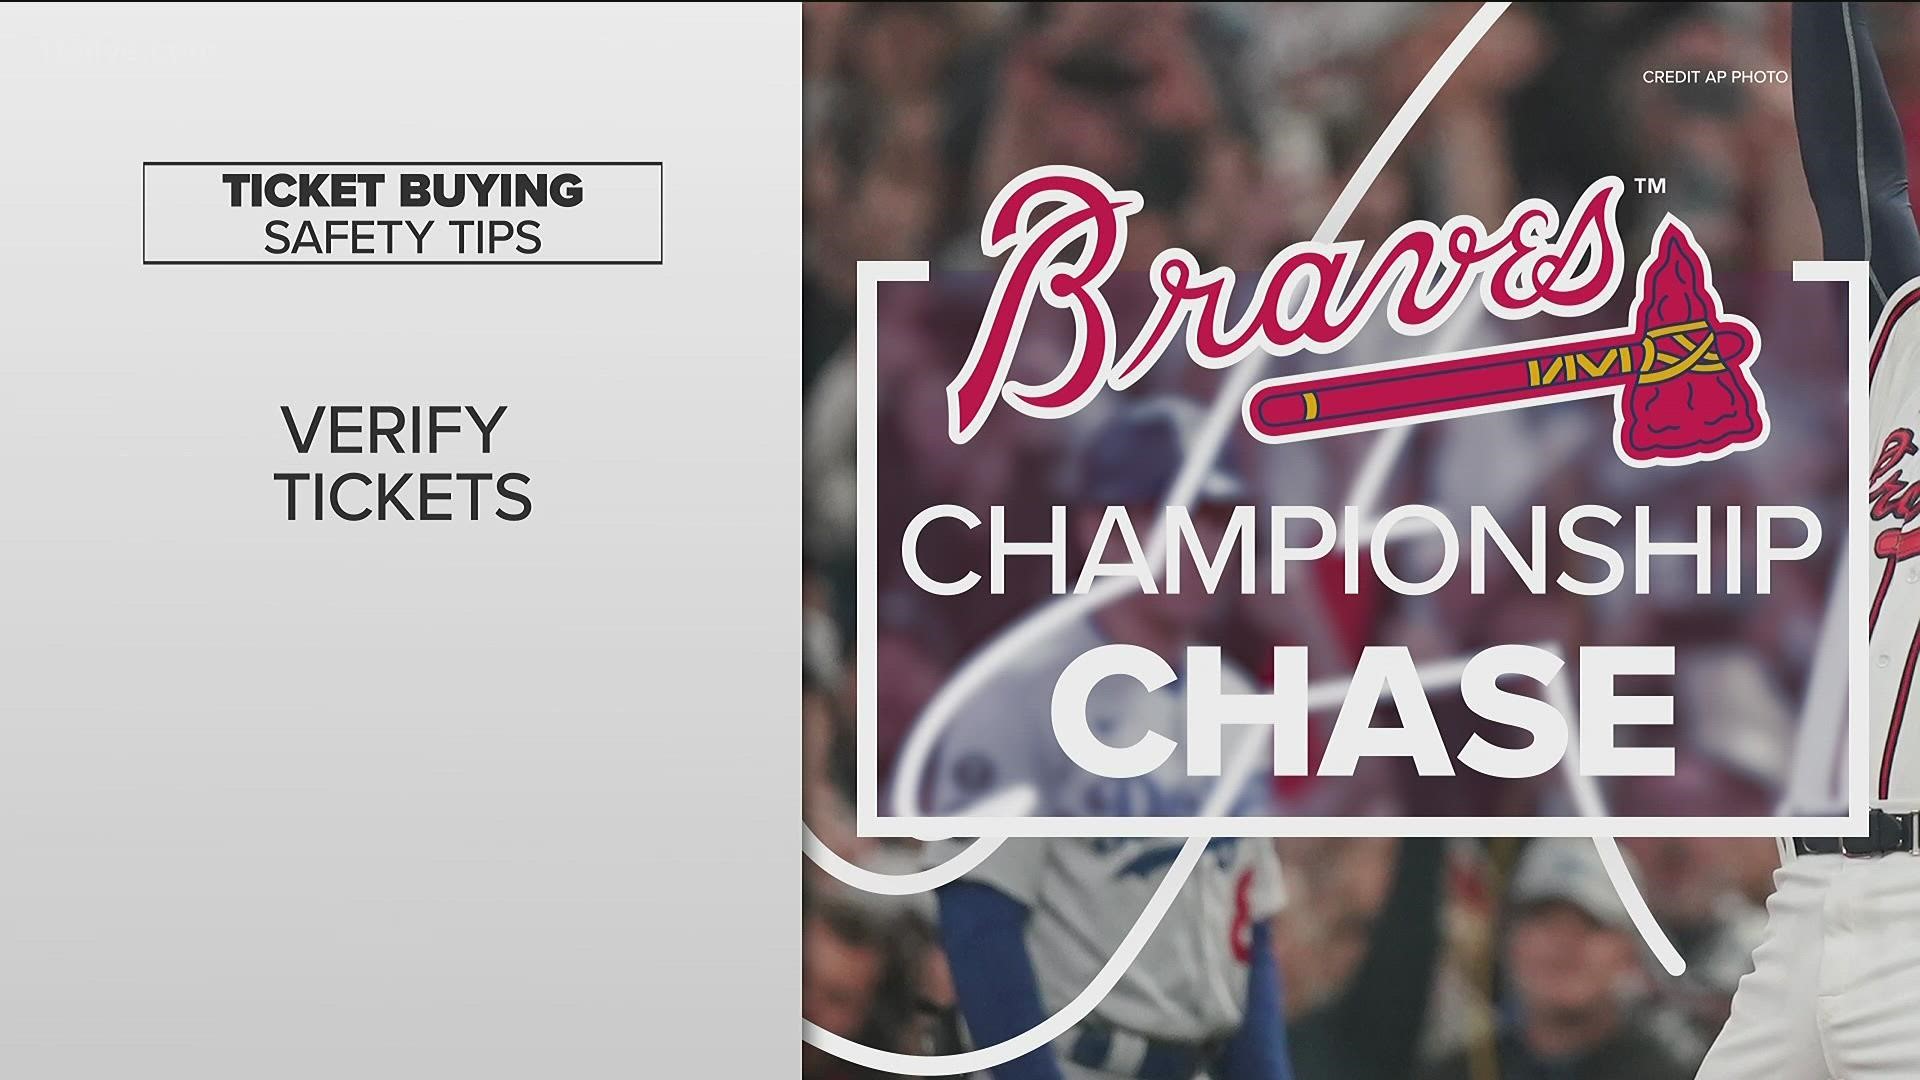 The Braves have some of the most expensive World Series tickets in the last decade. If you're trying to get tickets, make sure you don't get scammed.